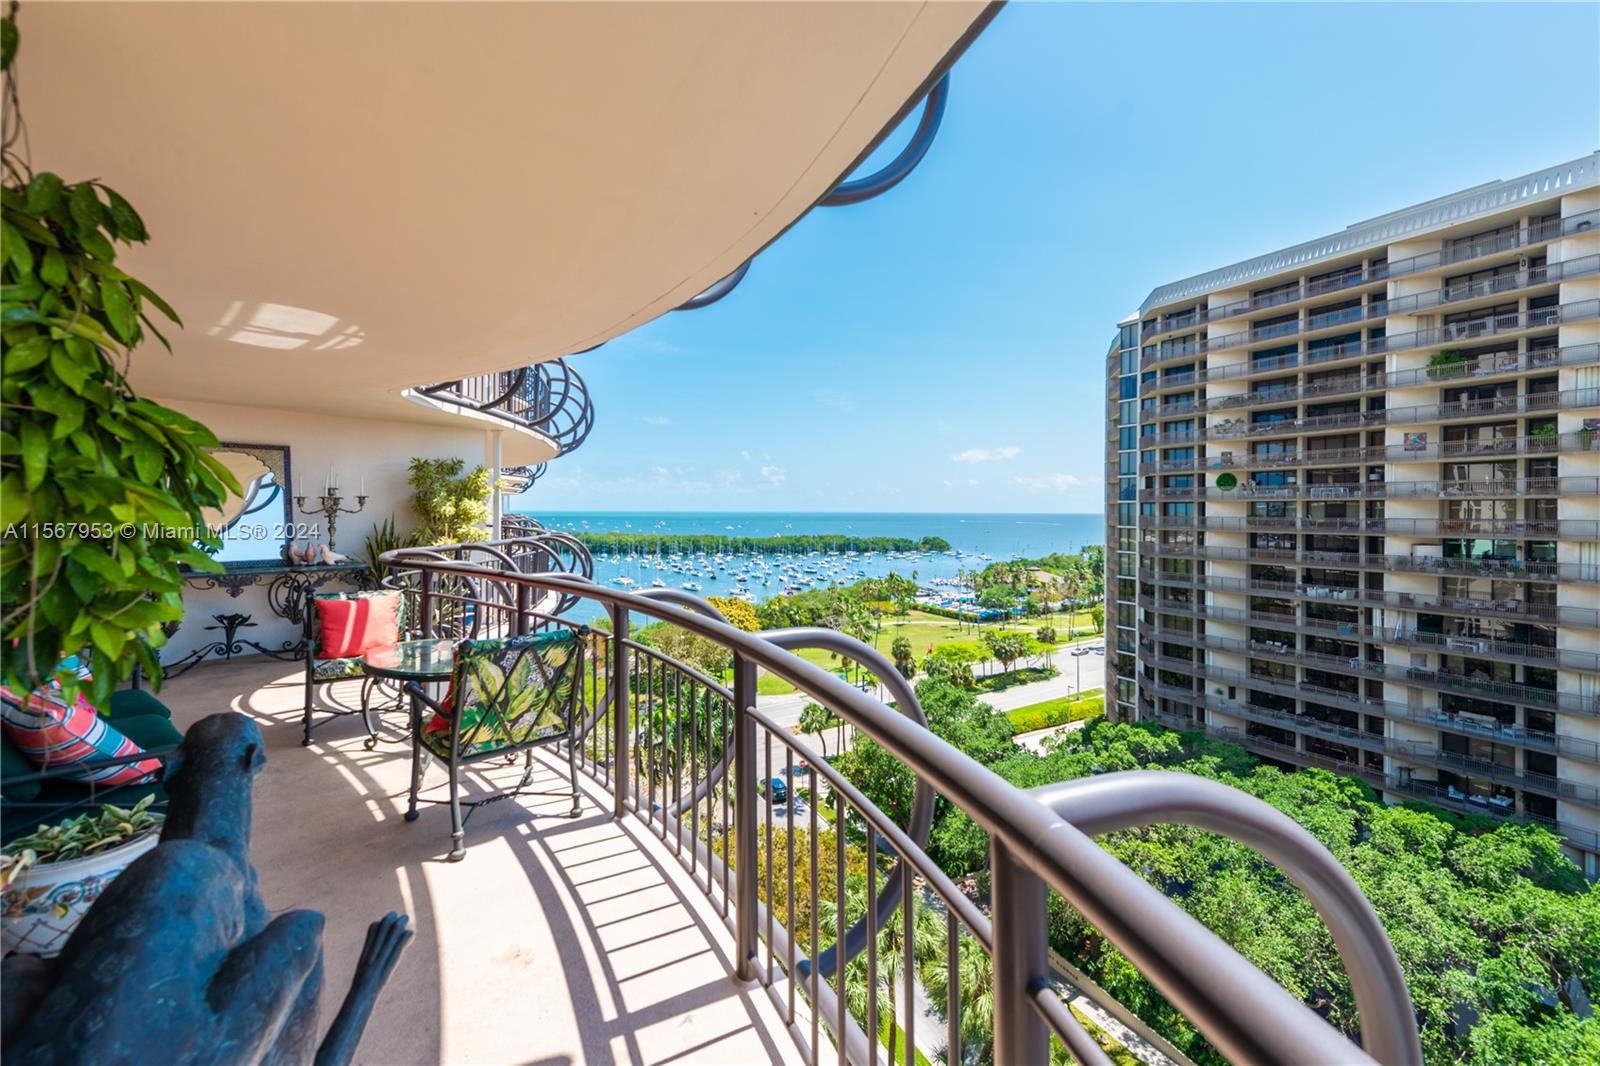 An opportunity to own in the ever growing Coconut Grove. Amazing water and city views at all times of the day and night from every room through floor to ceiling new impact glass. Forty year recertification process has been completed. New pool, hot tub spa, newly furnished poolside terrace and tennis courts have just been inaugurated. Grove Towers is a full service building 24 hours a day including valet parking. The unit comes with 1 deeded parking, lots of extra parking, storage, spacious bedrooms and added closet space . Updated cabinetry, appliances. All Coconut Grove has to offer is only steps away. Live here and enjoy restaurants, shops, movies supermarkets, boat clubs, marinas and so much more without having to drive!!!!!
 Great property with good energy. Come and see for yourself!